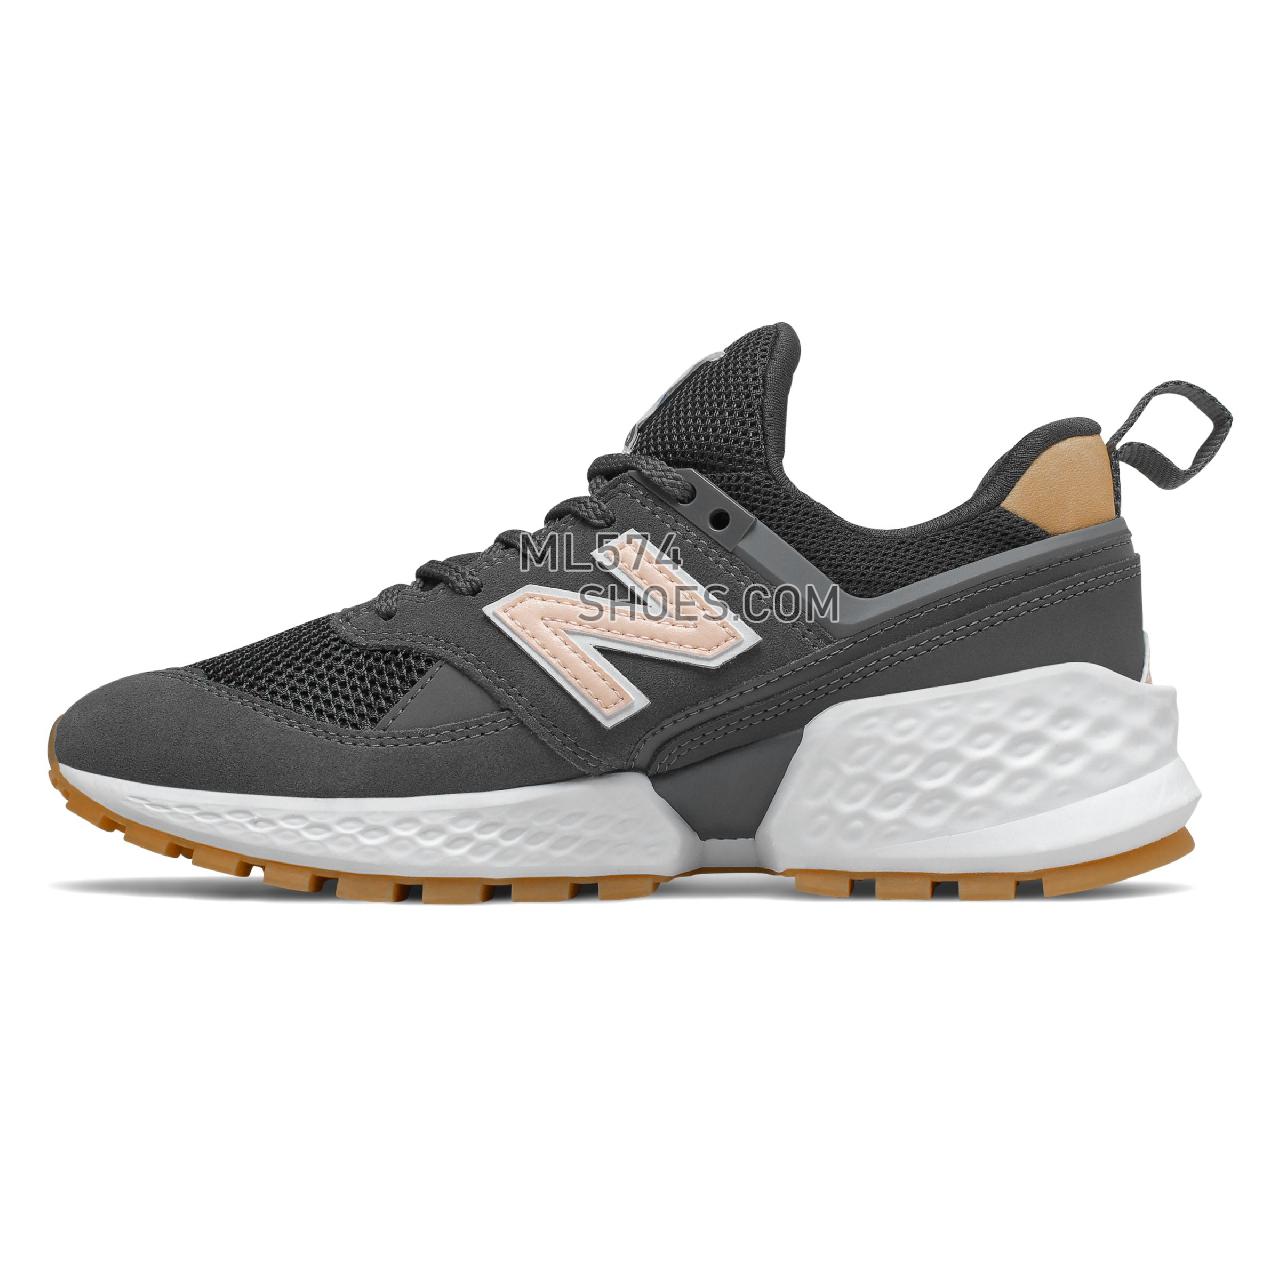 New Balance 574 Sport - Women's Sport Style Sneakers - Magnet with Oyster Pink and Tan - WS574JSA